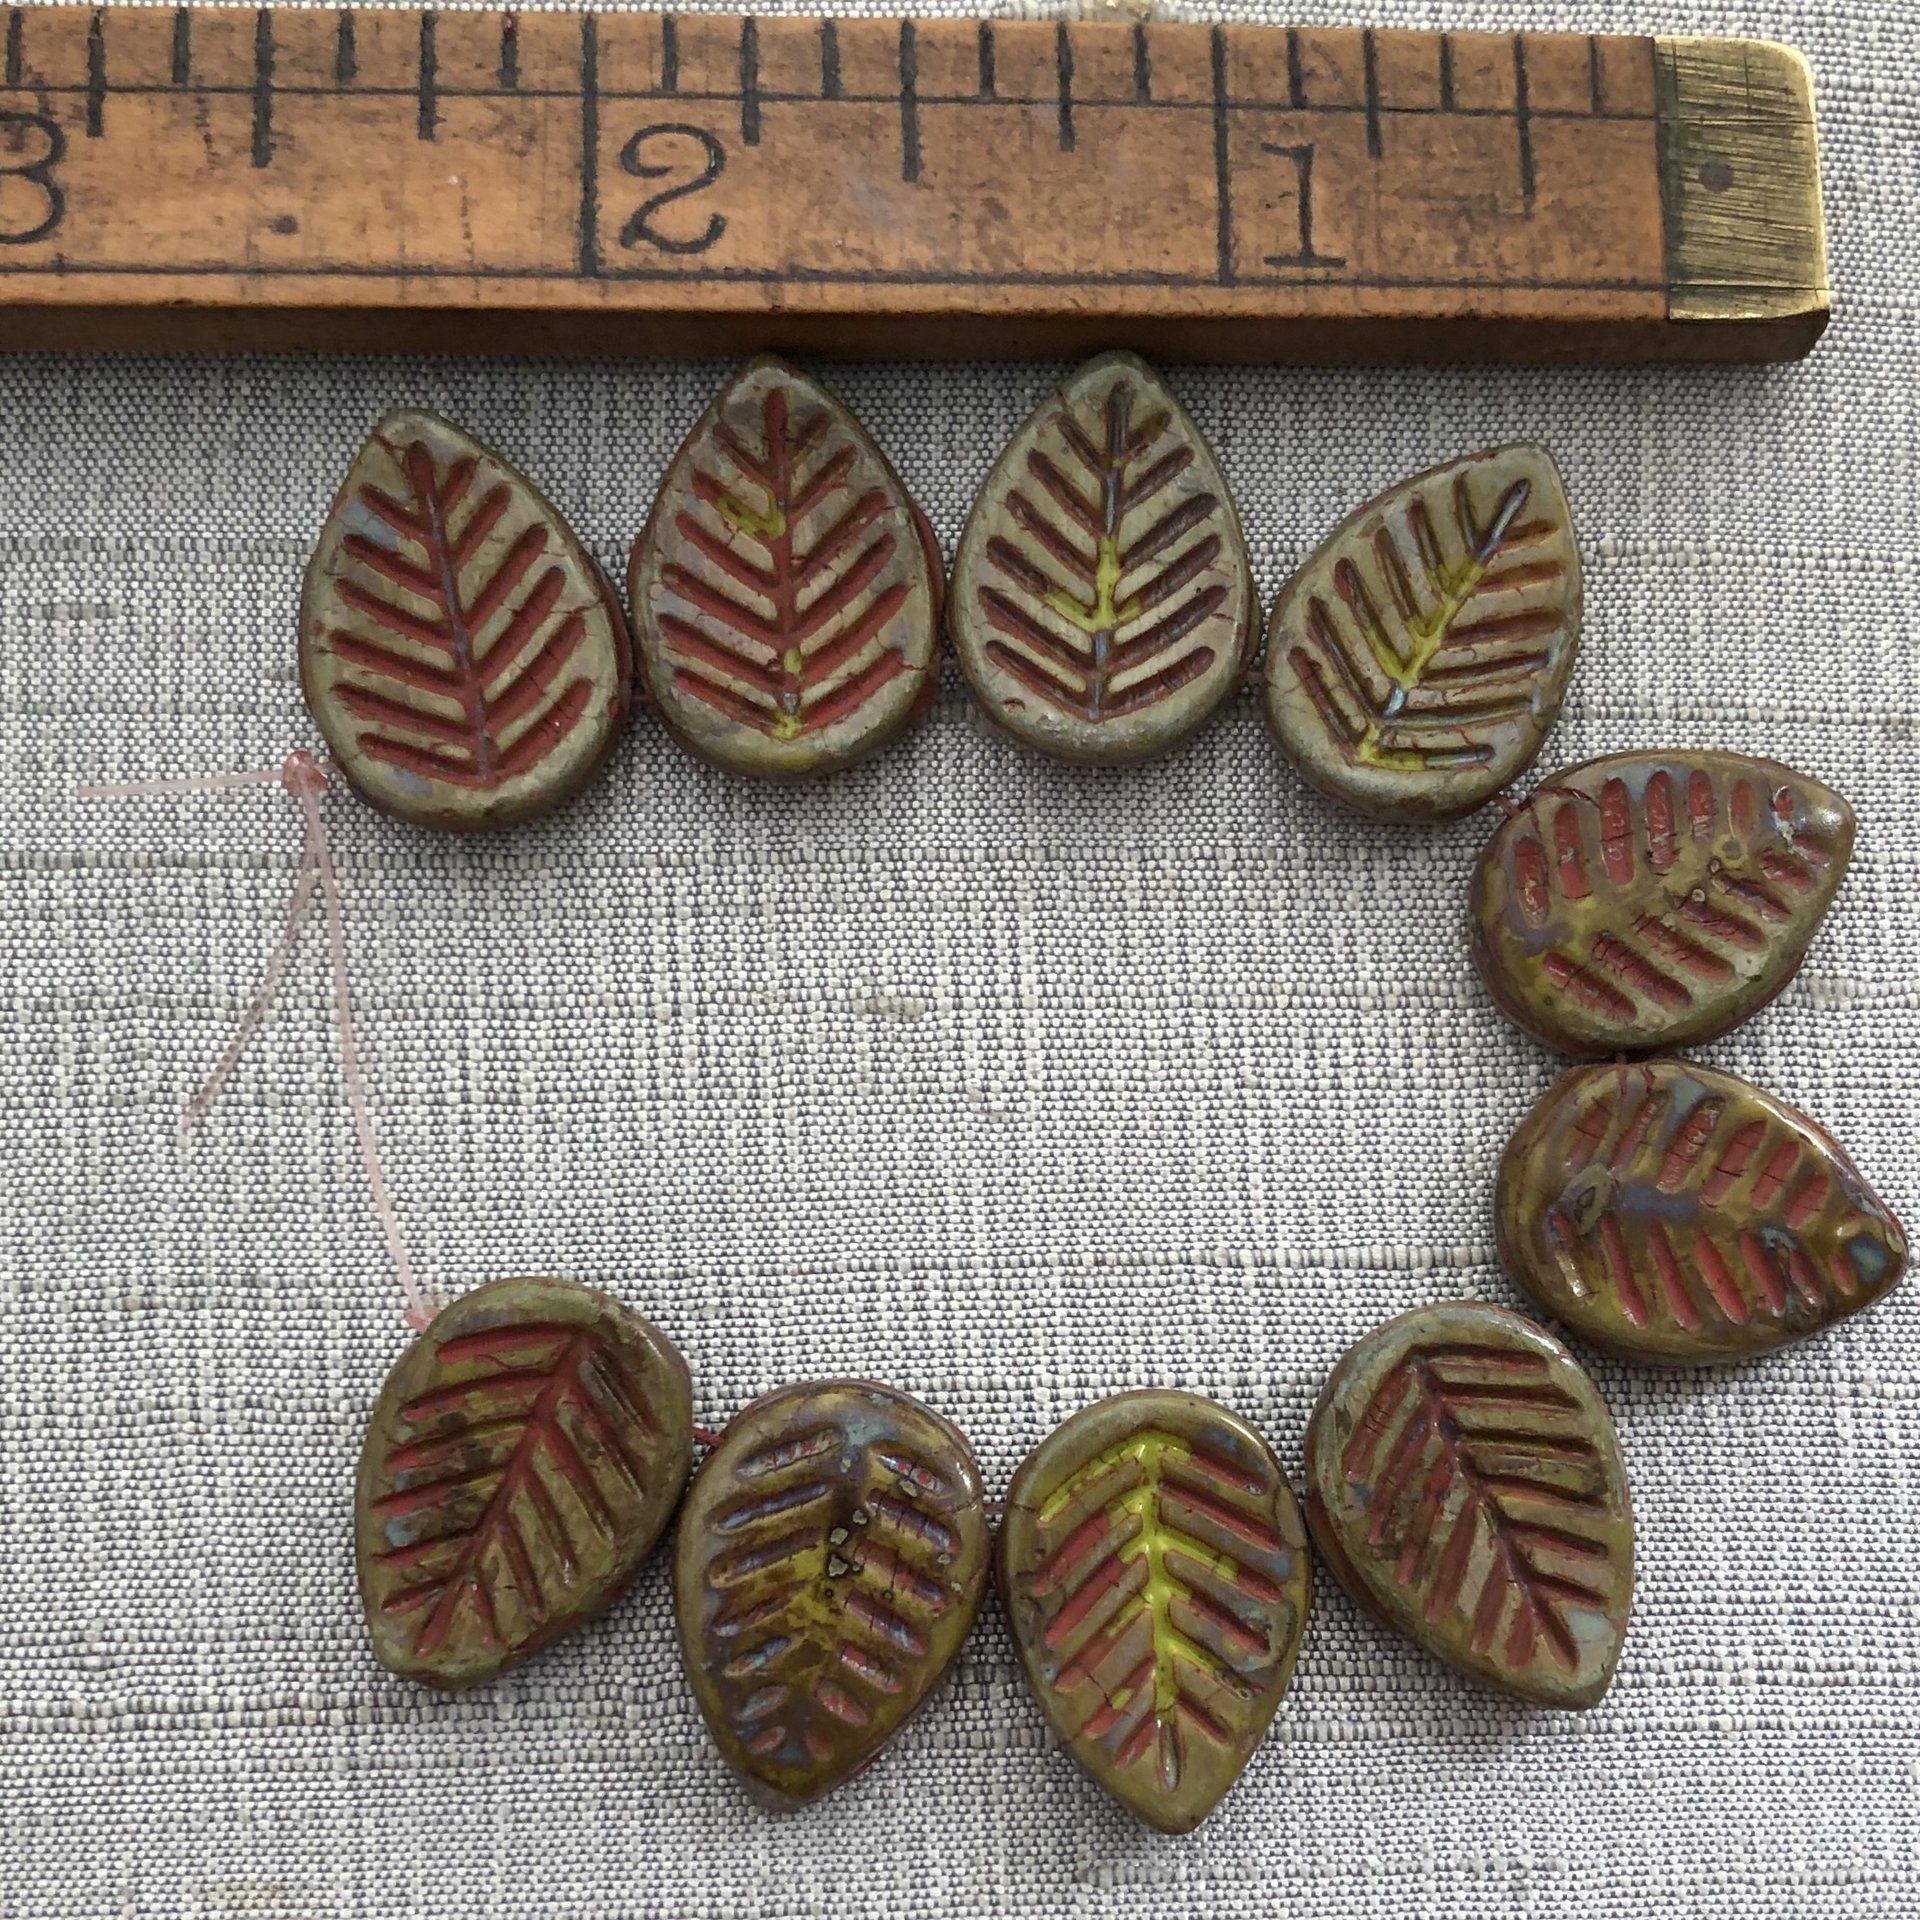 12x16mm Dogwood Leaves Artichoke with a Coral Wash